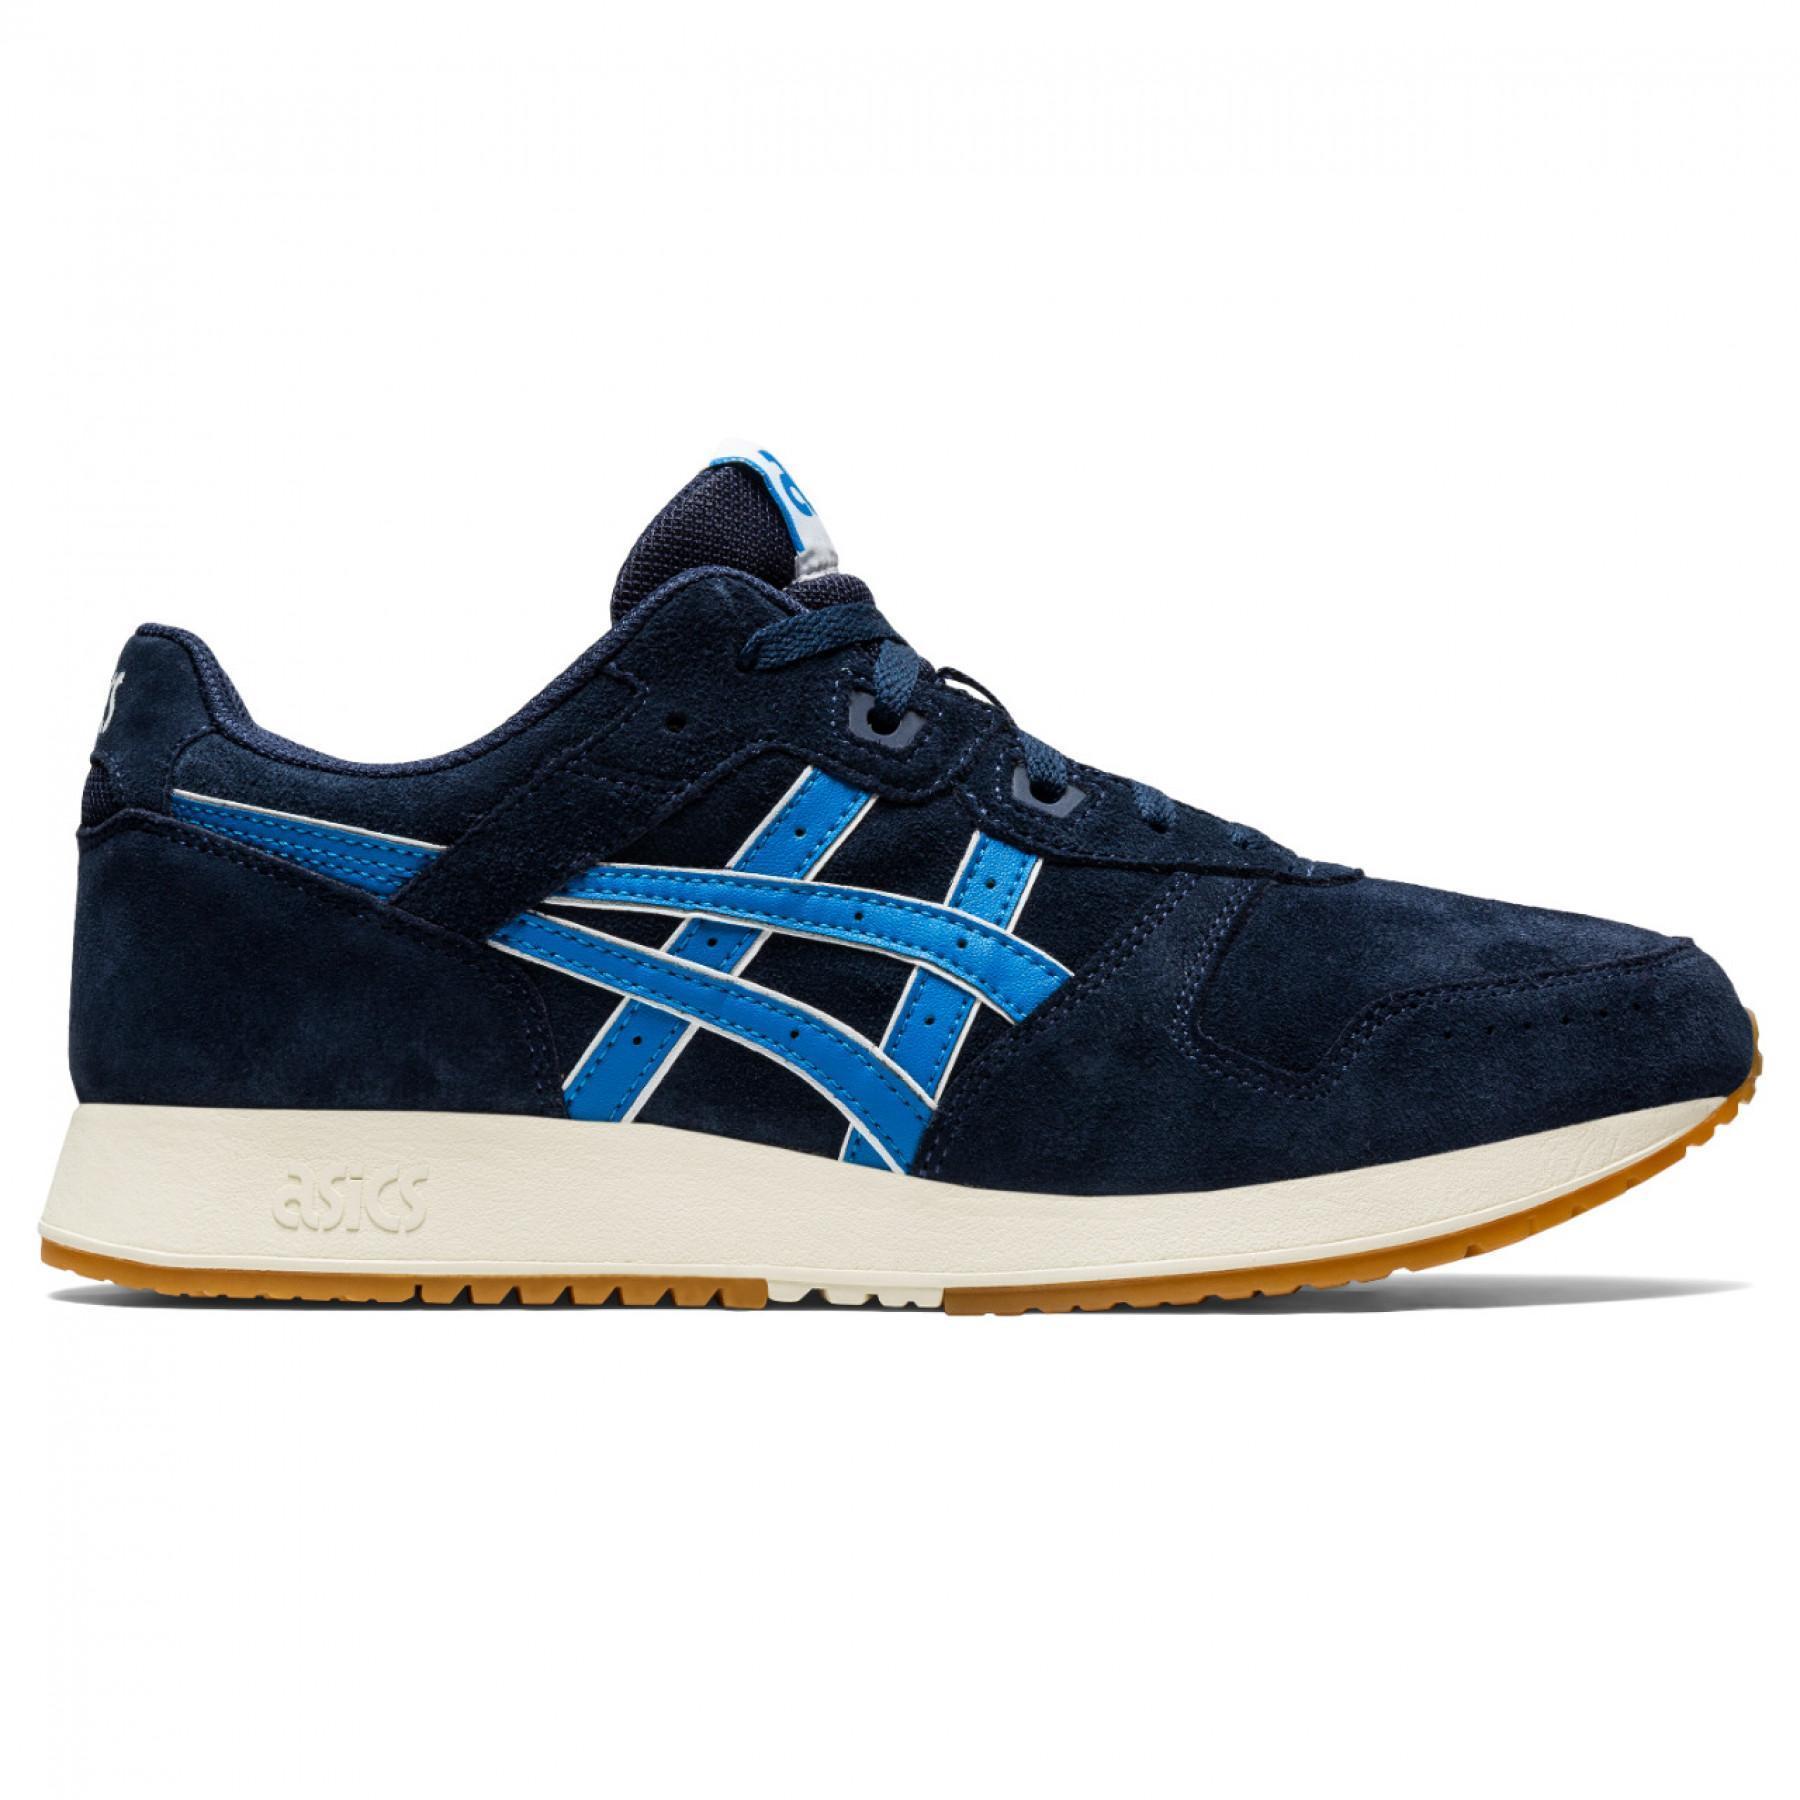 Formadores Asics Lyte Classic